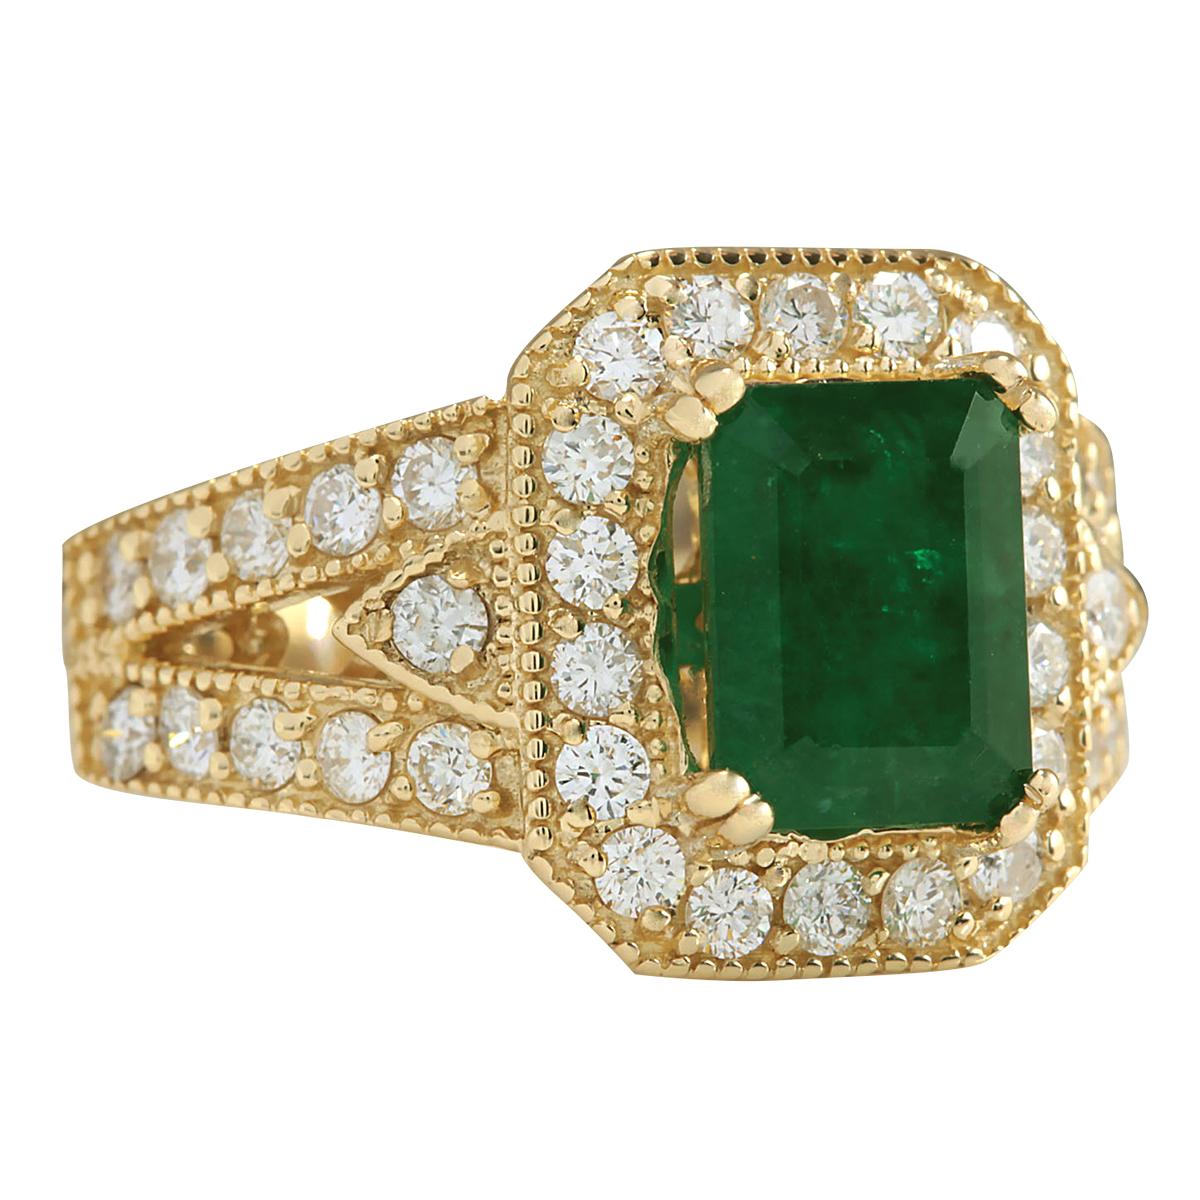 Stamped: 14K Yellow Gold
Total Ring Weight: 8.0 Grams
Total Natural Emerald Weight is 2.40 Carat (Measures: 9.00x7.00 mm)
Color: Green
Total Natural Diamond Weight is 1.20 Carat
Color: F-G, Clarity: VS2-SI1
Face Measures: 14.45x12.20 mm
Sku: